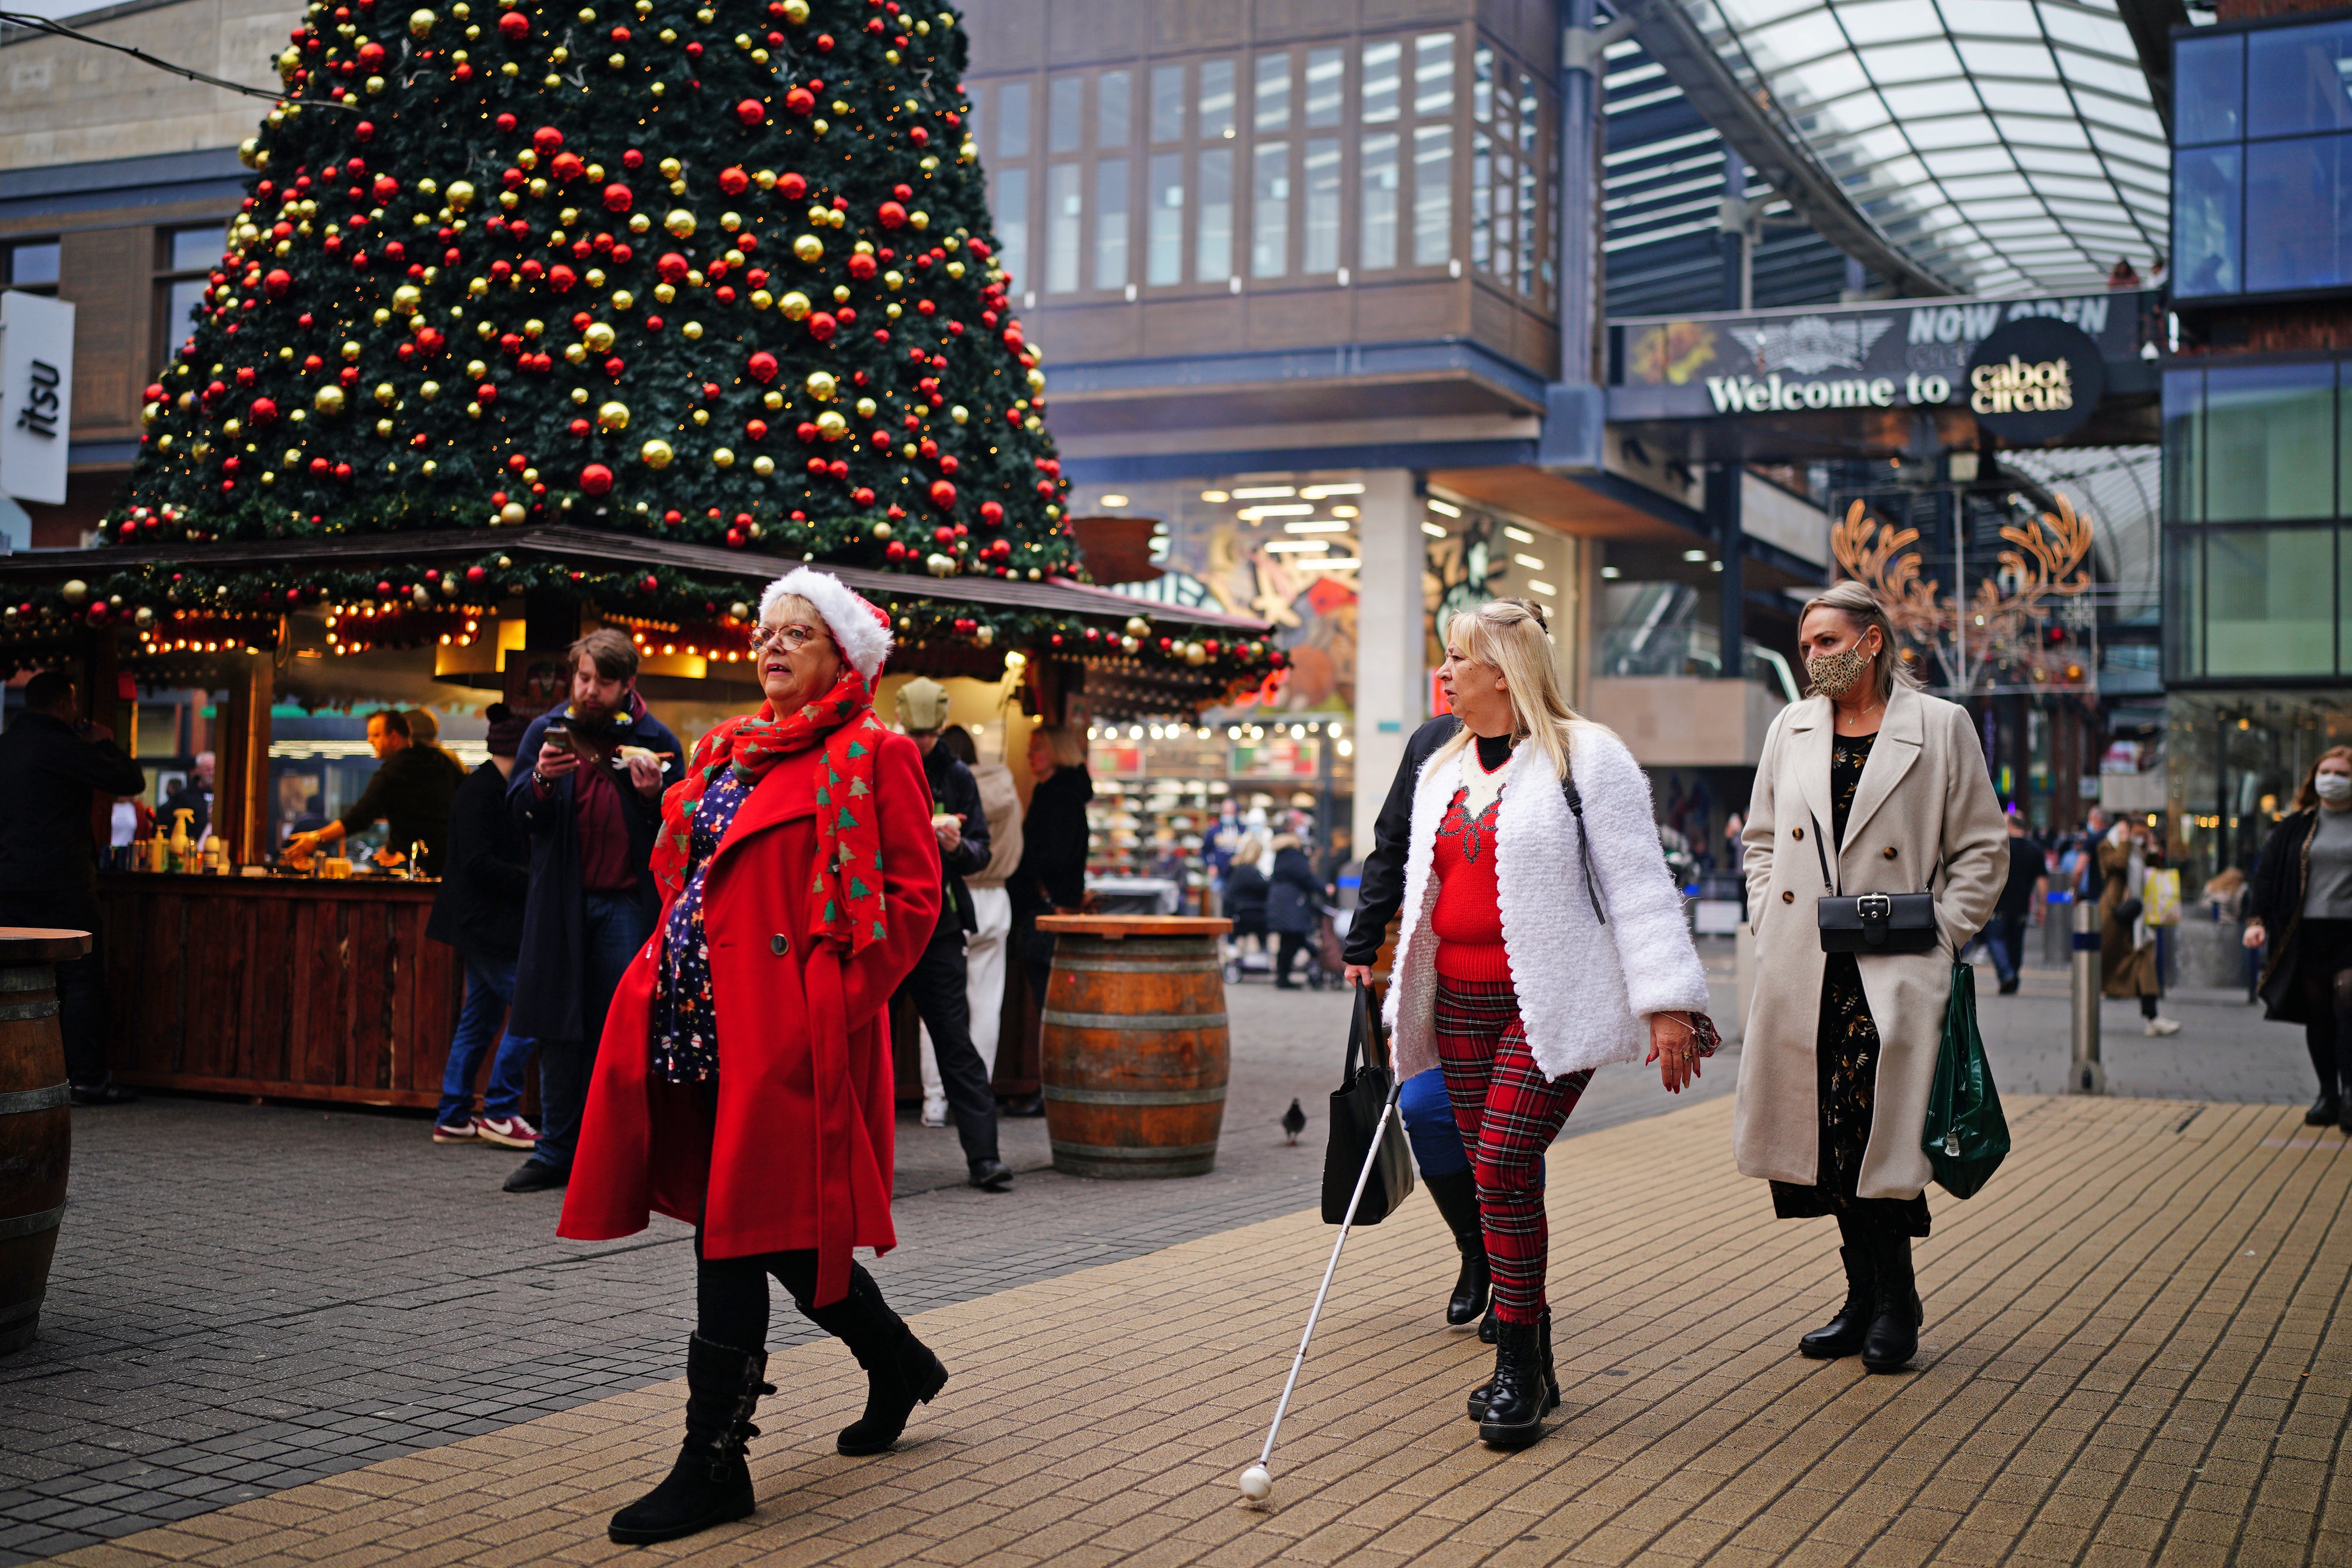 The fear of Omicron put a dampener on footfall figures on Britain’s high streets, figures have shown (Ben Birchall/PA)